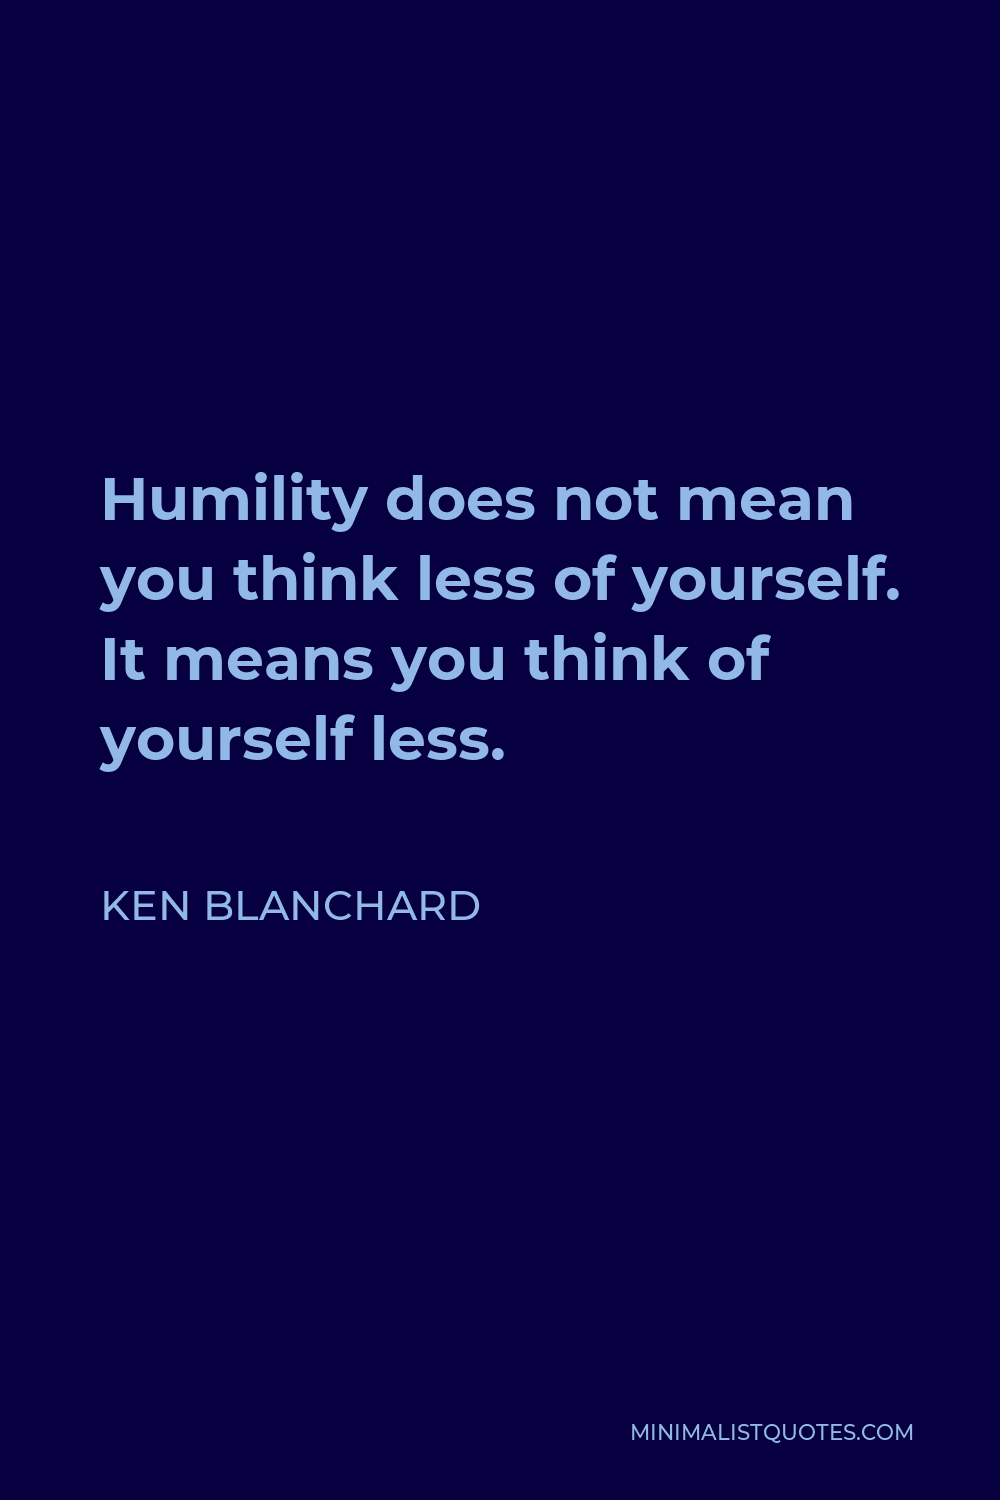 Ken Blanchard Quote - Humility does not mean you think less of yourself. It means you think of yourself less.